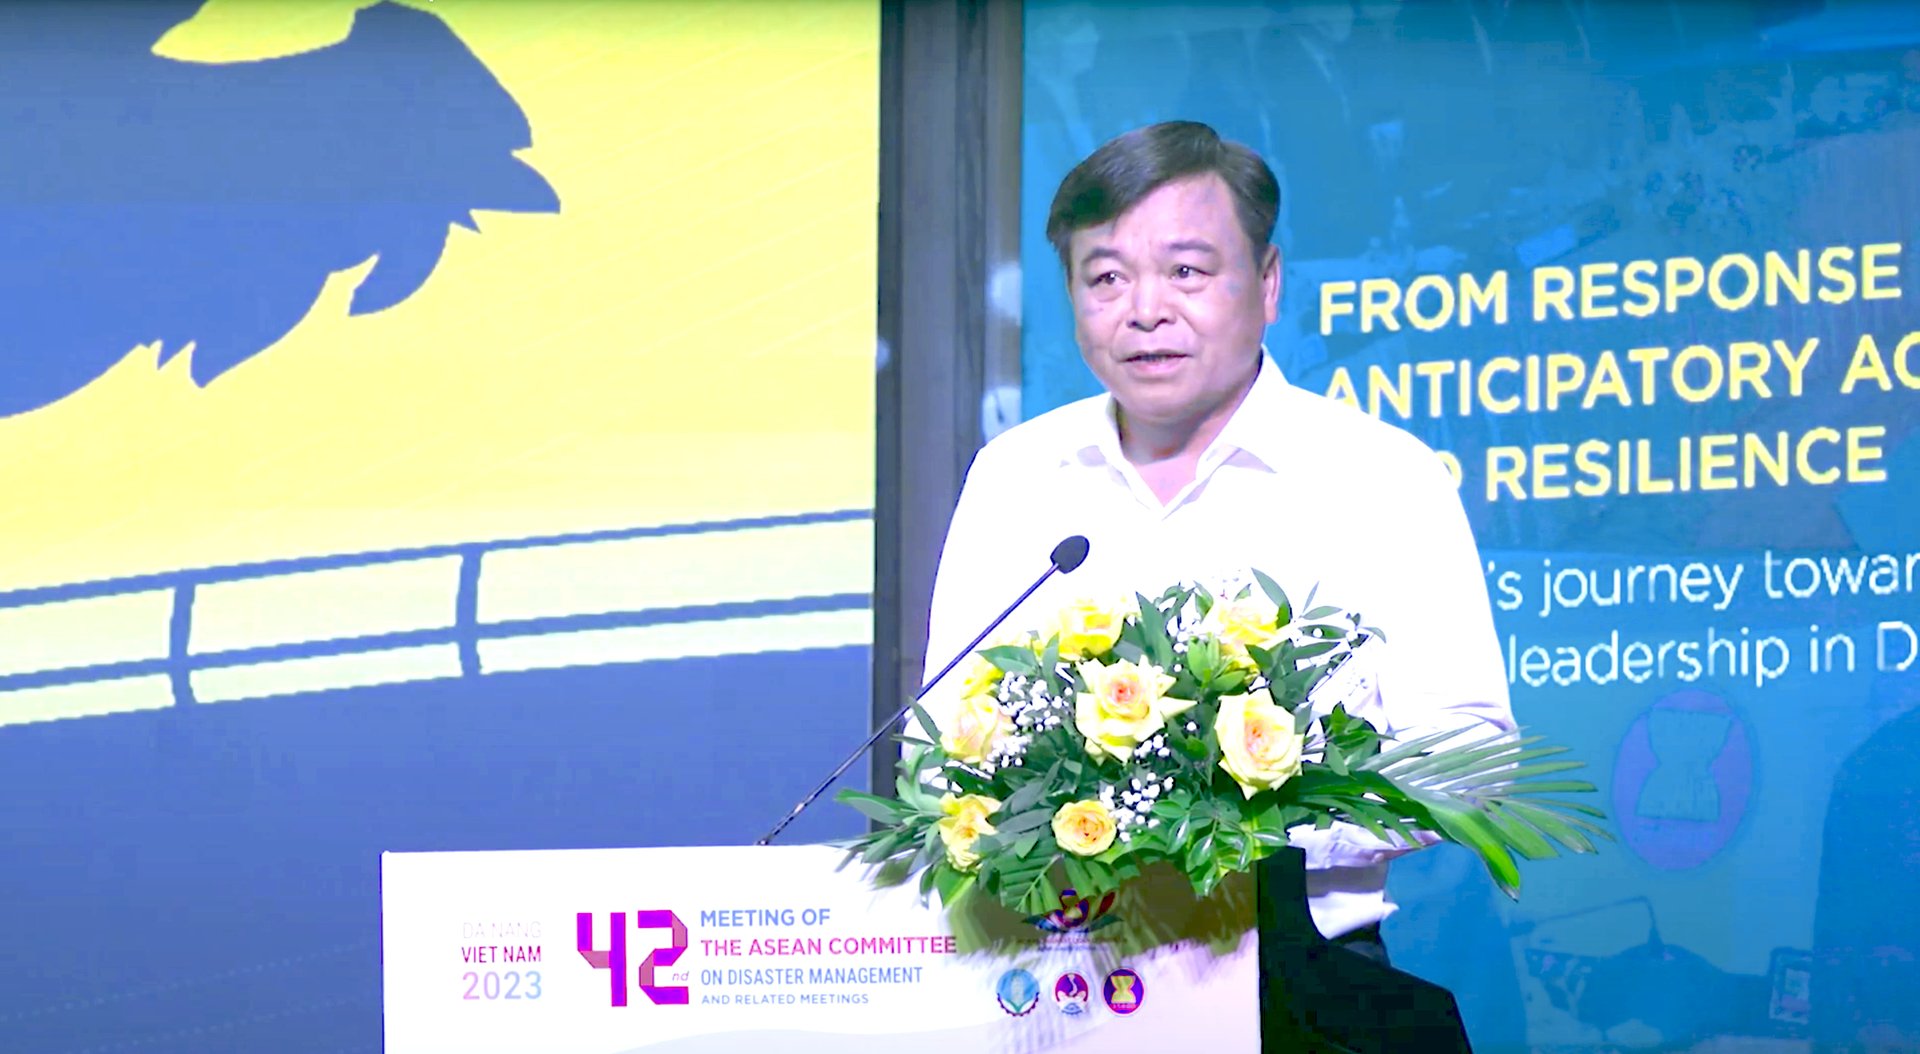 Mr. Nguyen Hoang Hiep – MARD Deputy Minister and Deputy Head of the National Steering Committee for Natural Disaster Prevention and Control – delivers the opening speech at the 42nd ASEAN Committee Meeting on Disaster Management in Da Nang.